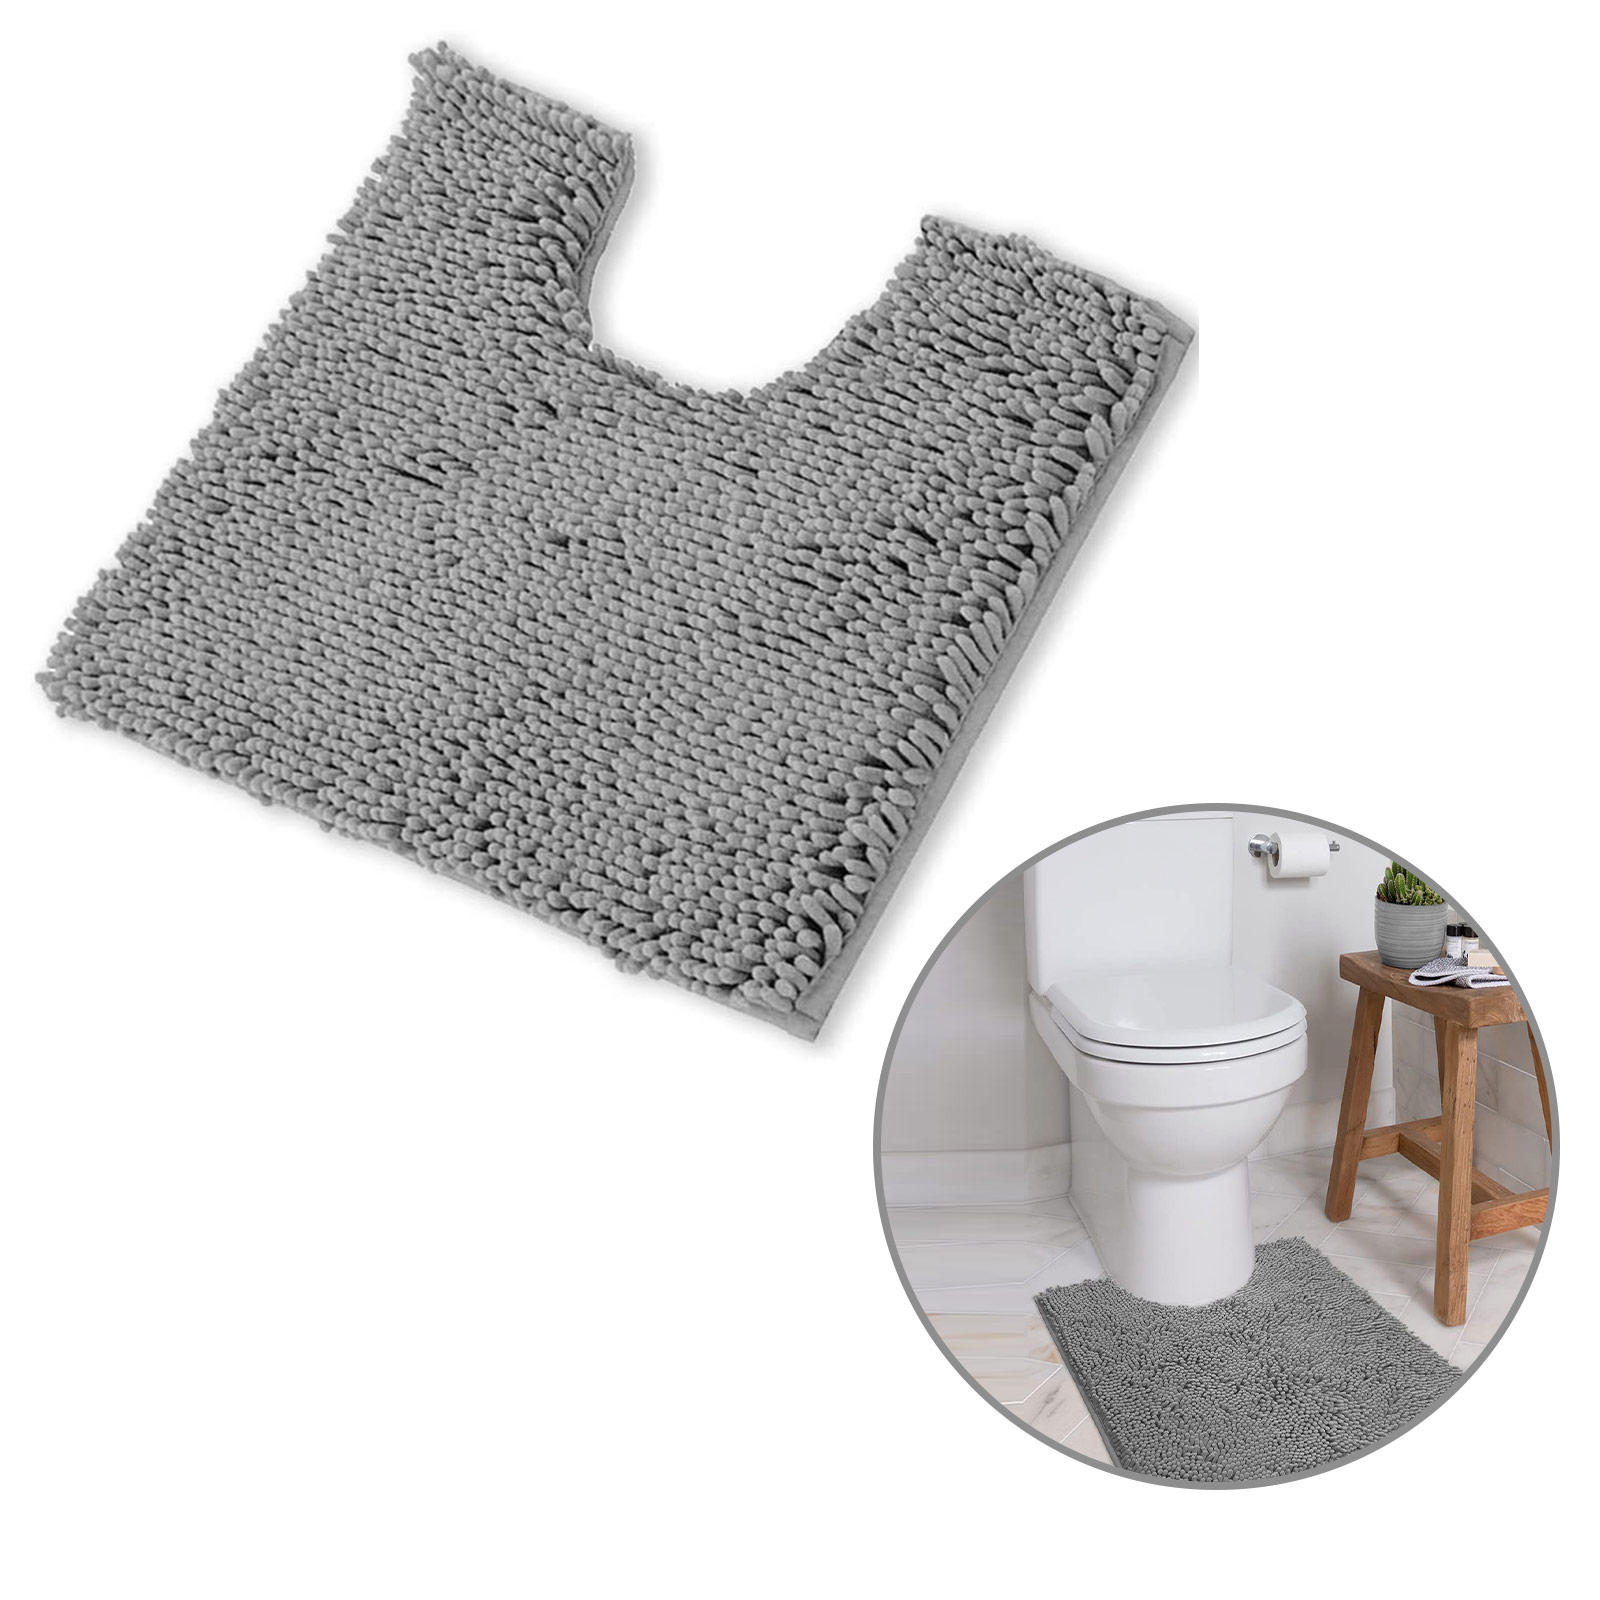 Tripumer Bath Rugs U-Shaped Toilet Mats Ultra Soft Non Slip and Absorbent Chenille Contour Bath Rug 20x20 inch Bathroom Rugs Light Gray Plush Bath Mats Machine Wash and Dry - image 1 of 6